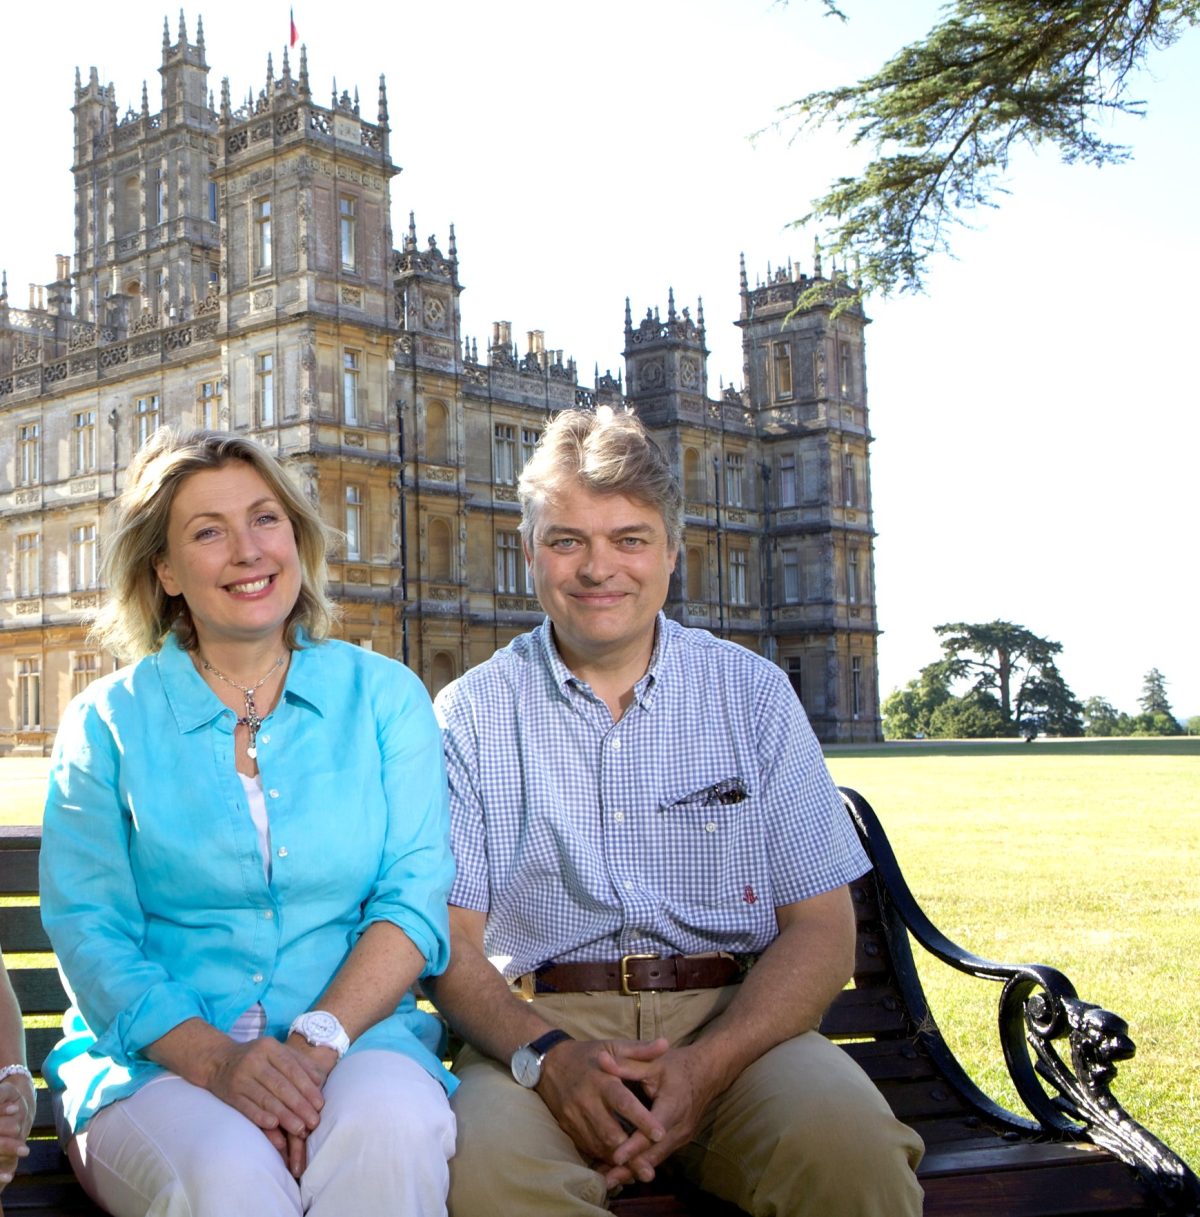 Lady Carnarvron and Lord Carnarvron pictured on bench in front of Downton Abbey